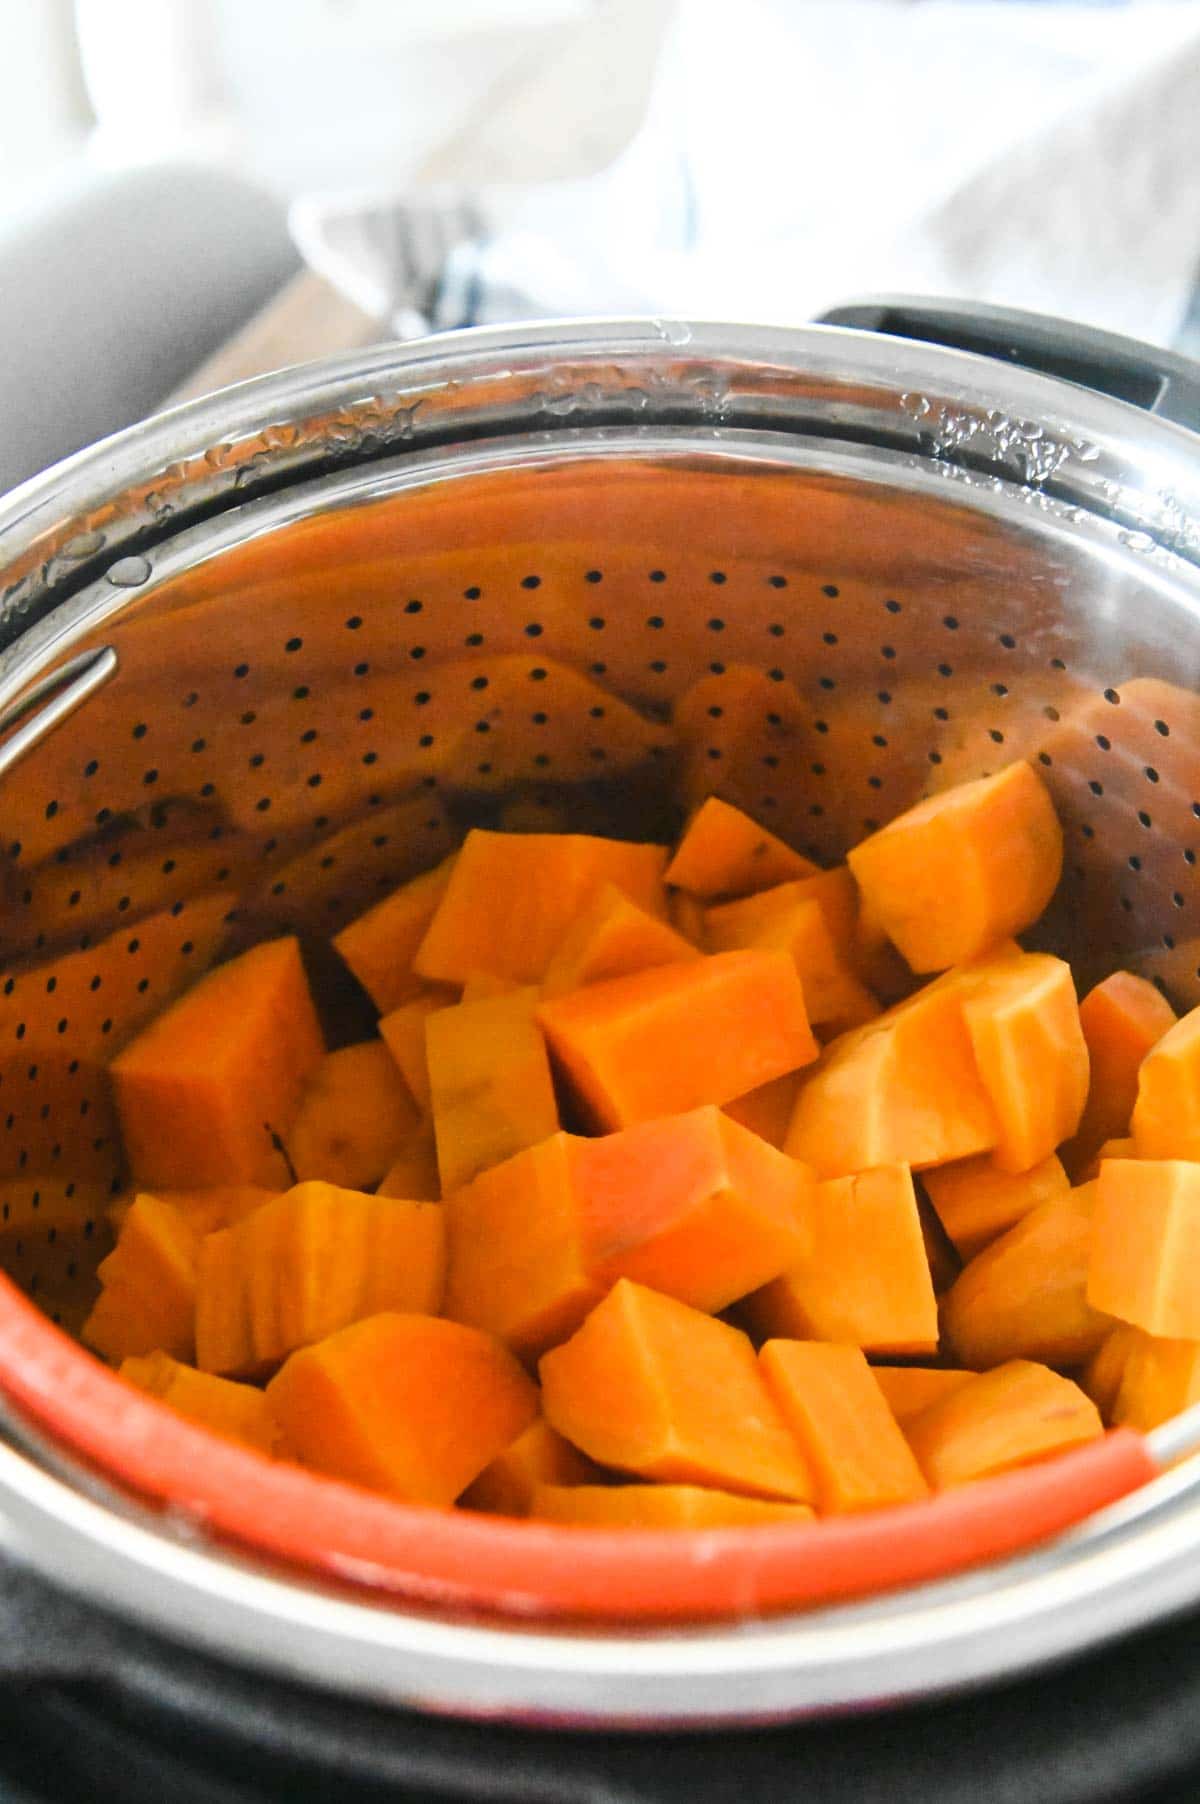 Cooked diced sweet potatoes in a steamer basket.